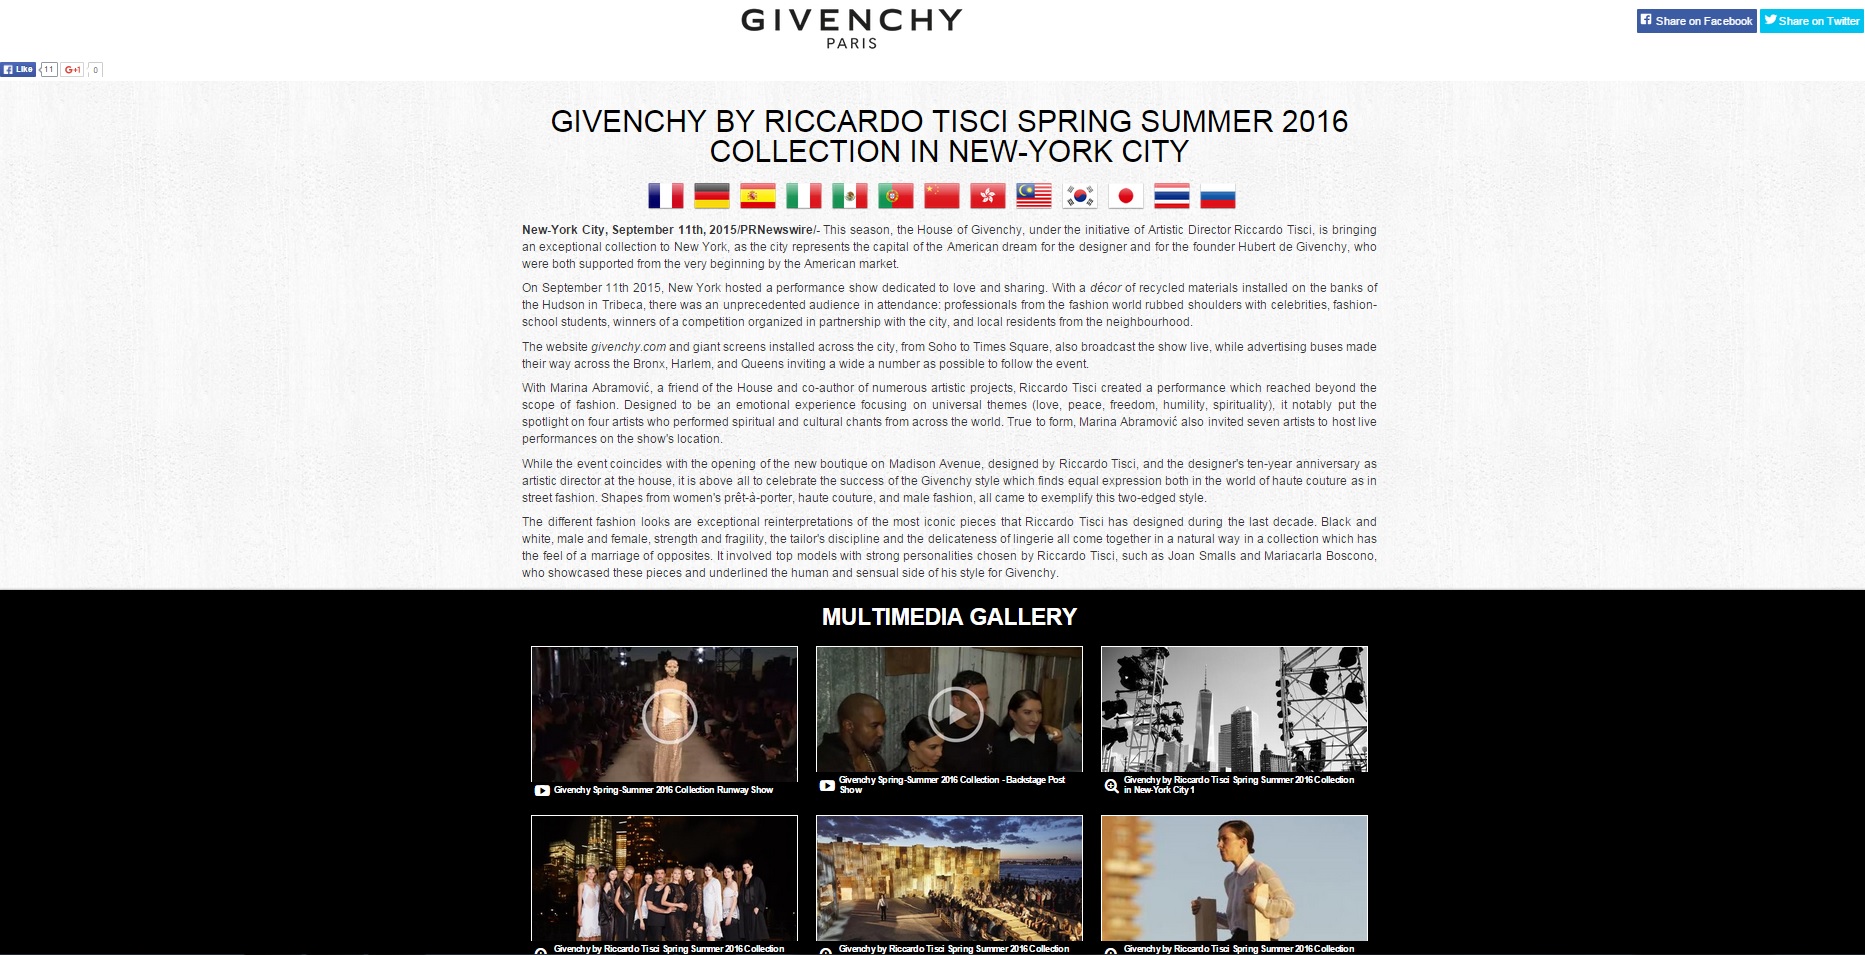 Givenchy's Multimedia release